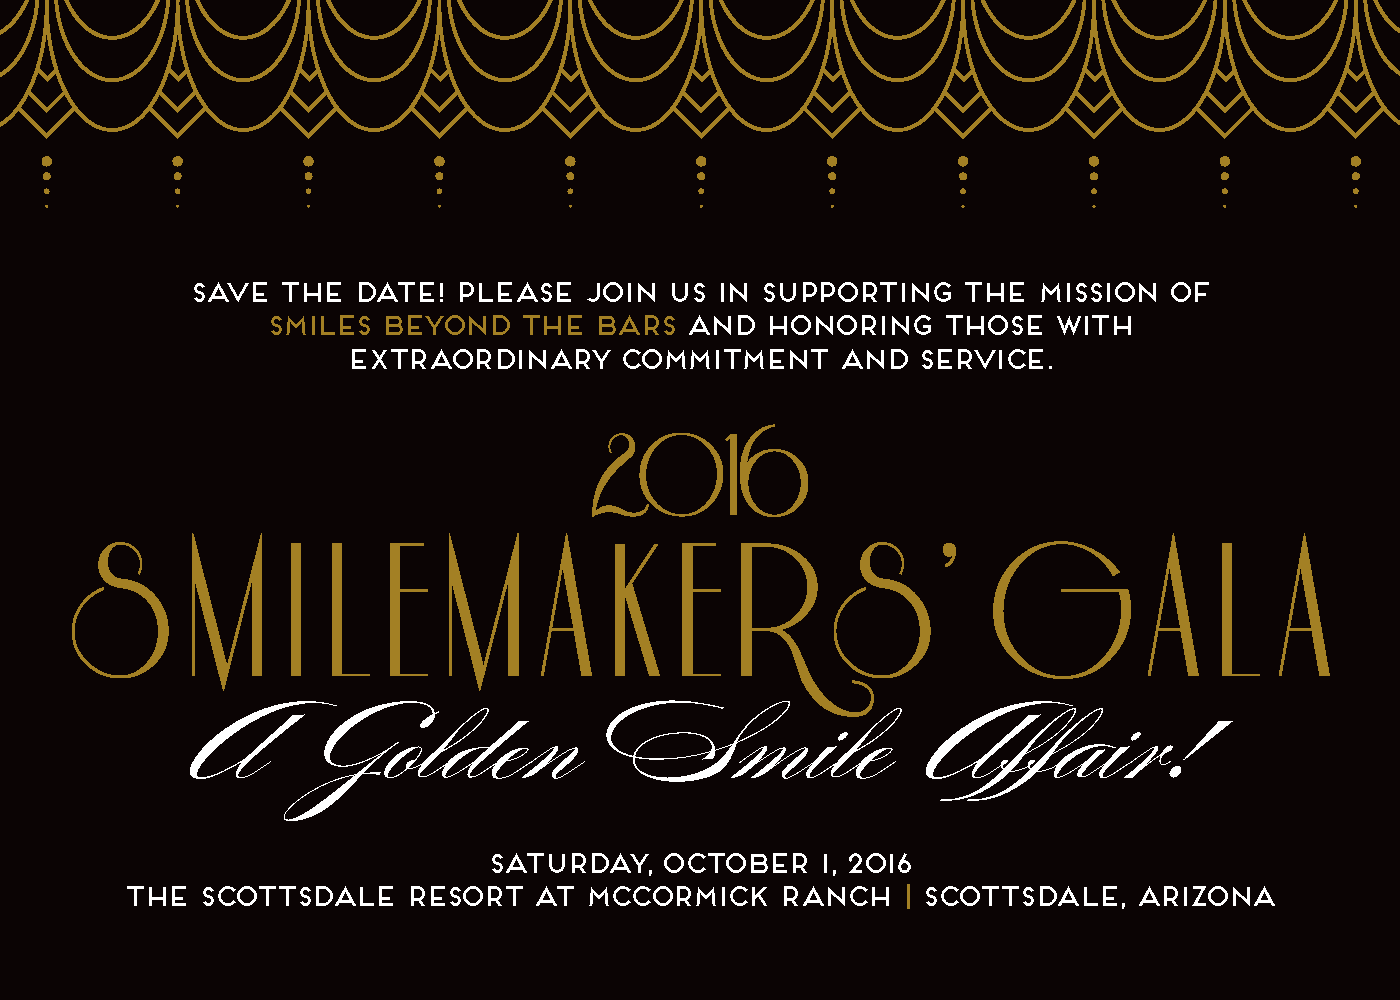 Save the Date for the 2016 Gala